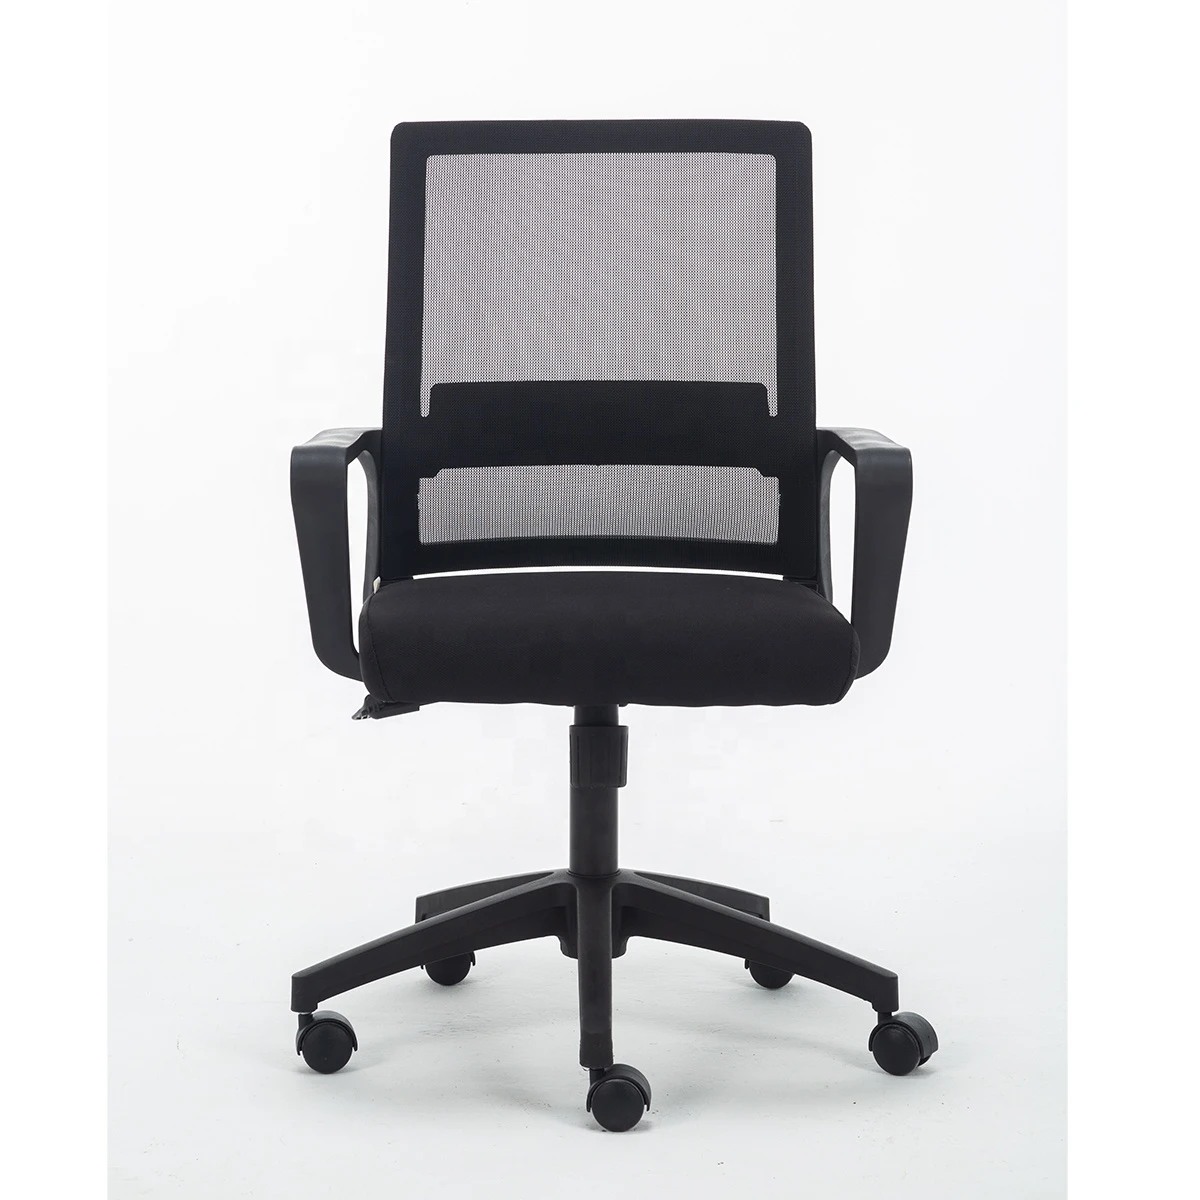 Black simple custom Color free office mesh chair computer room desk chair revolving chair with fixed armrest sedia gaming